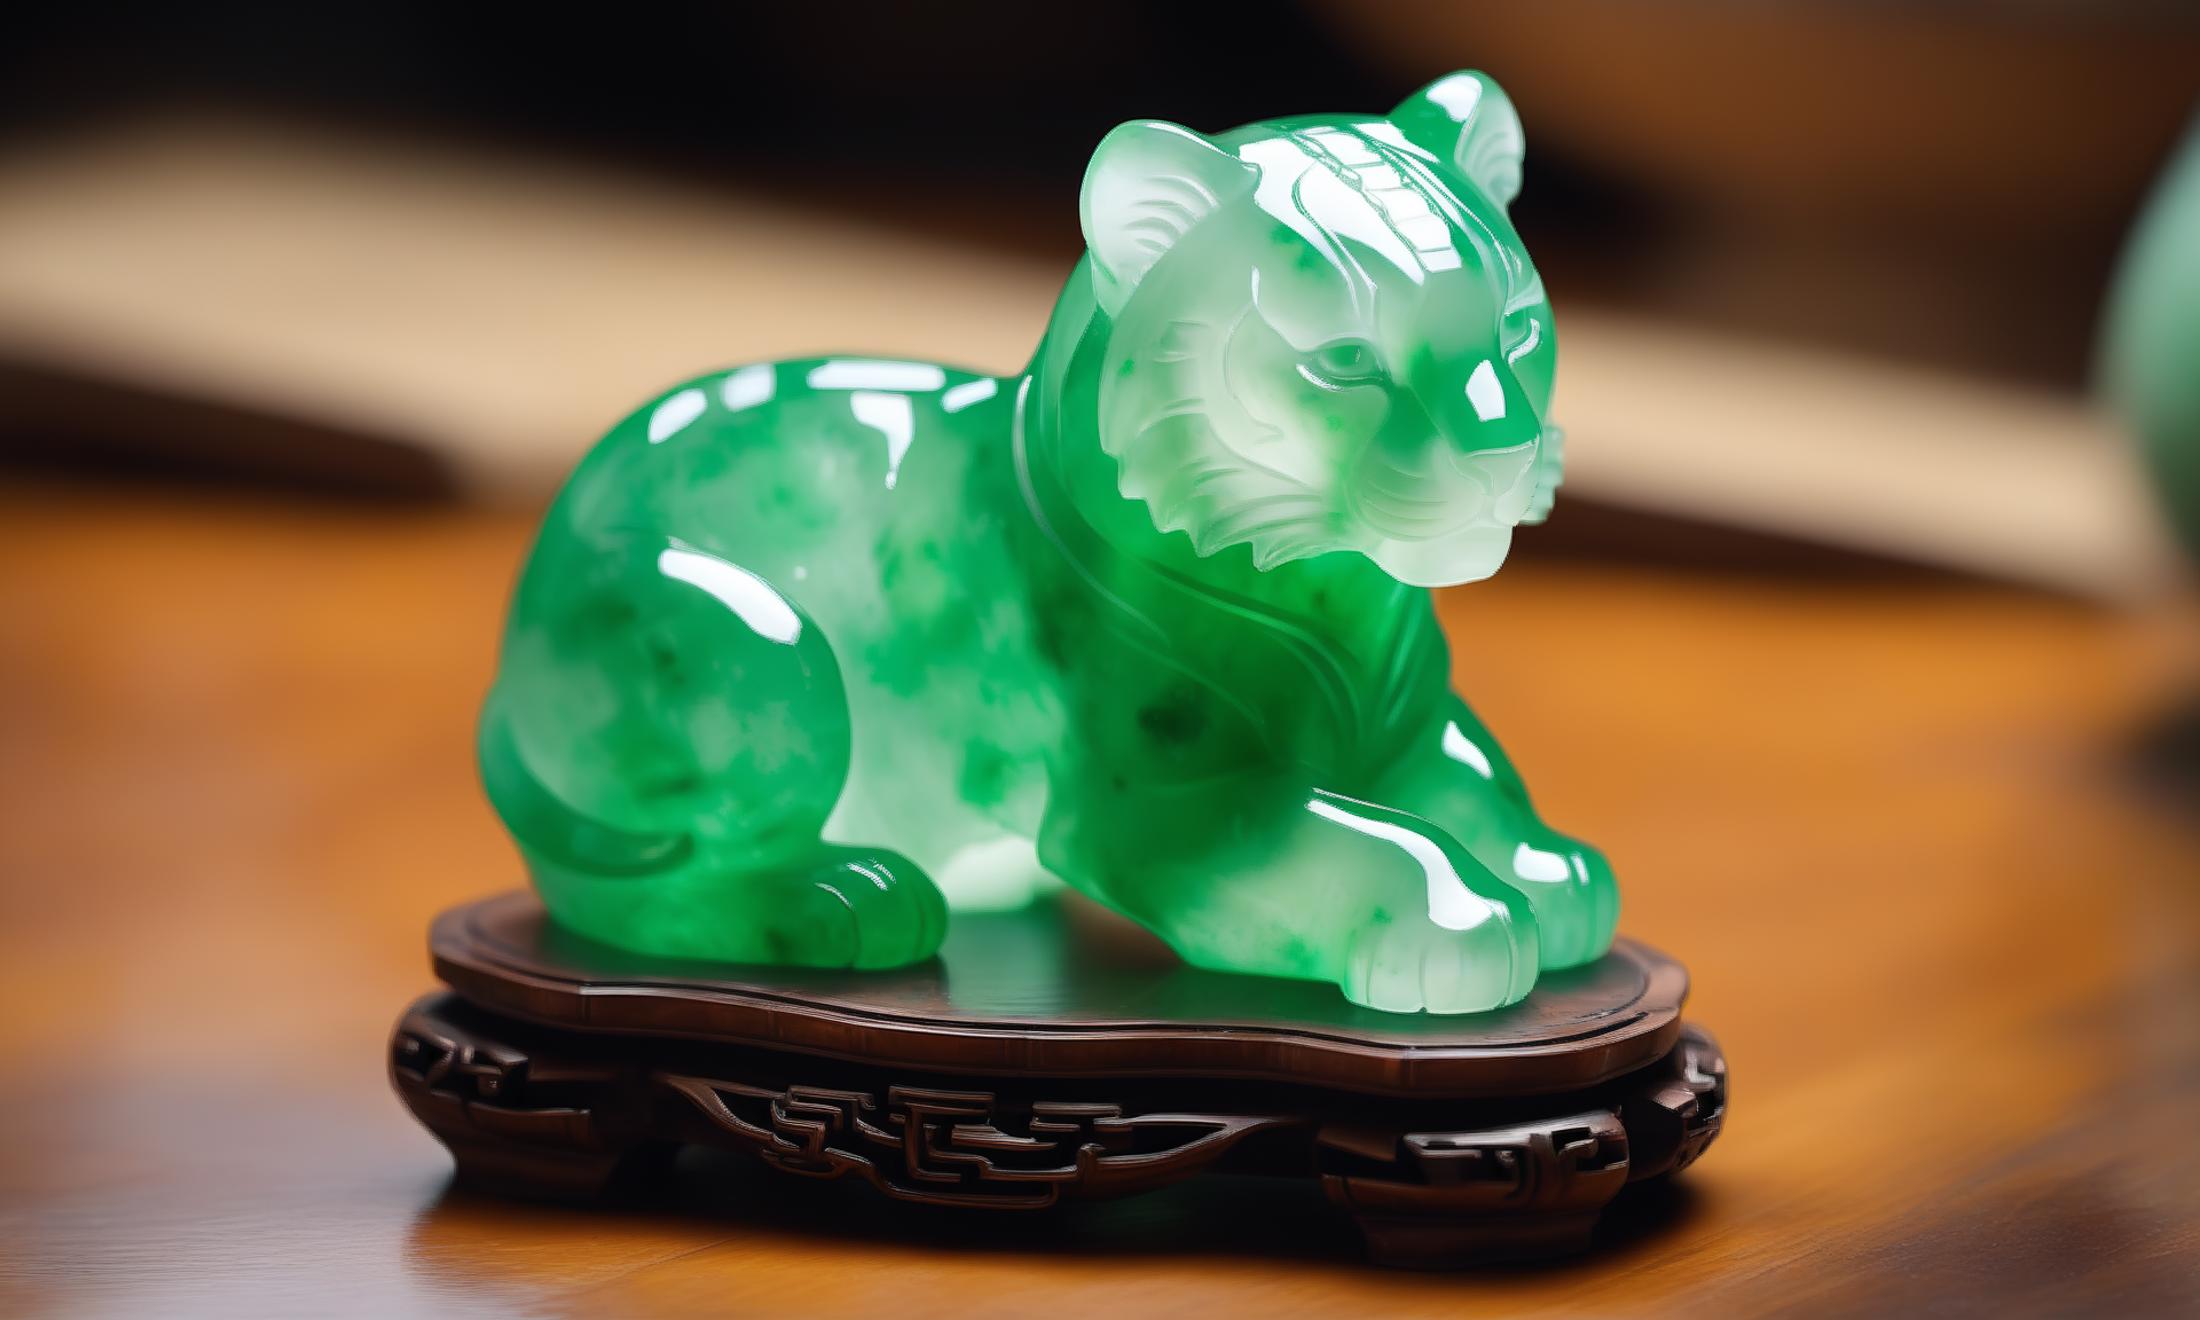 XL Realistic jadeite carving art style image by comingdemon